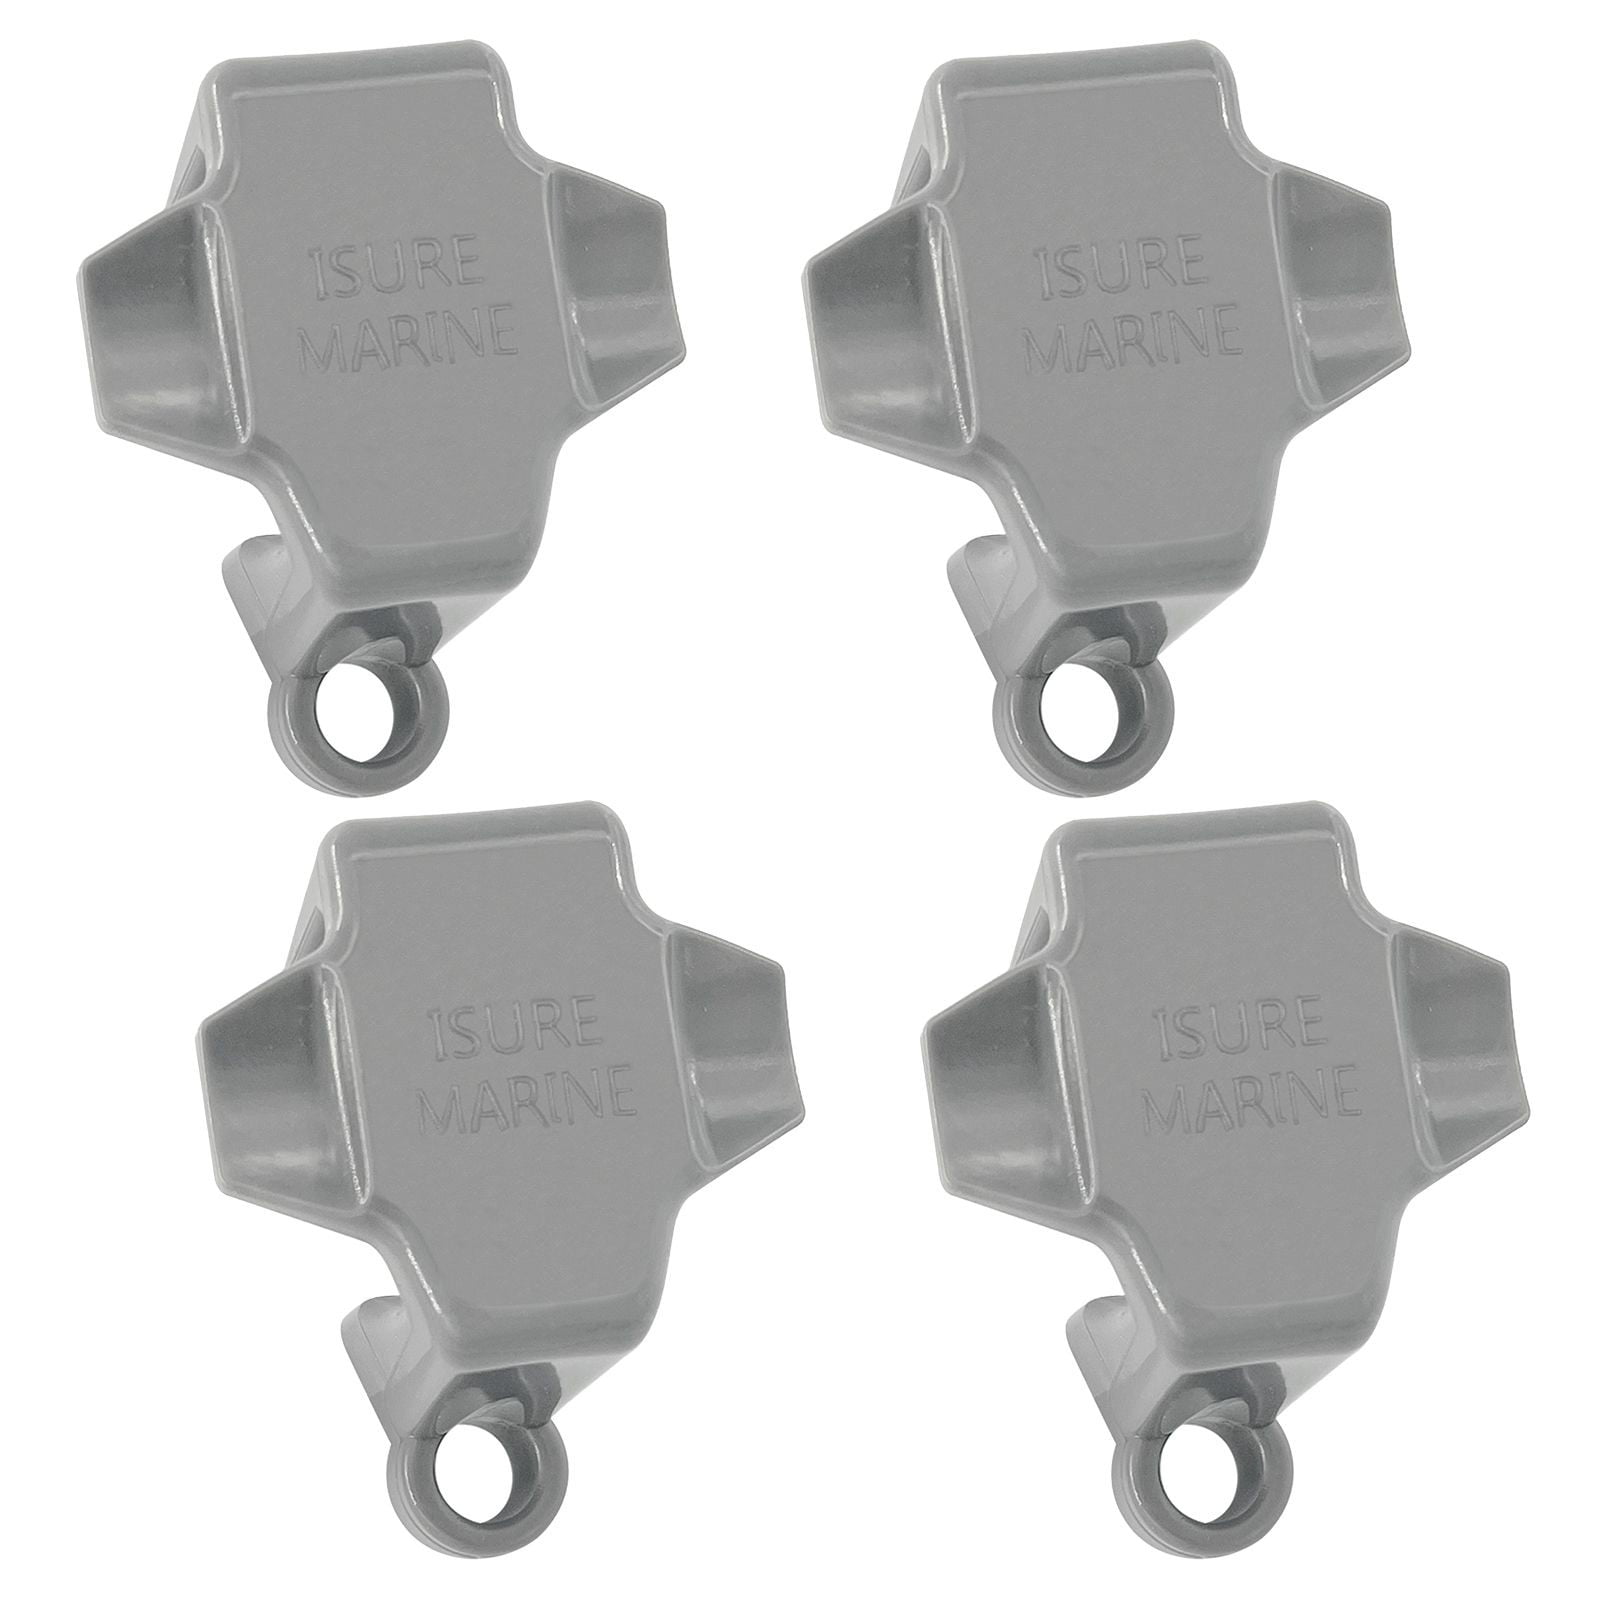 Pontoon boat fender clips for easy clip in & release of bumpers